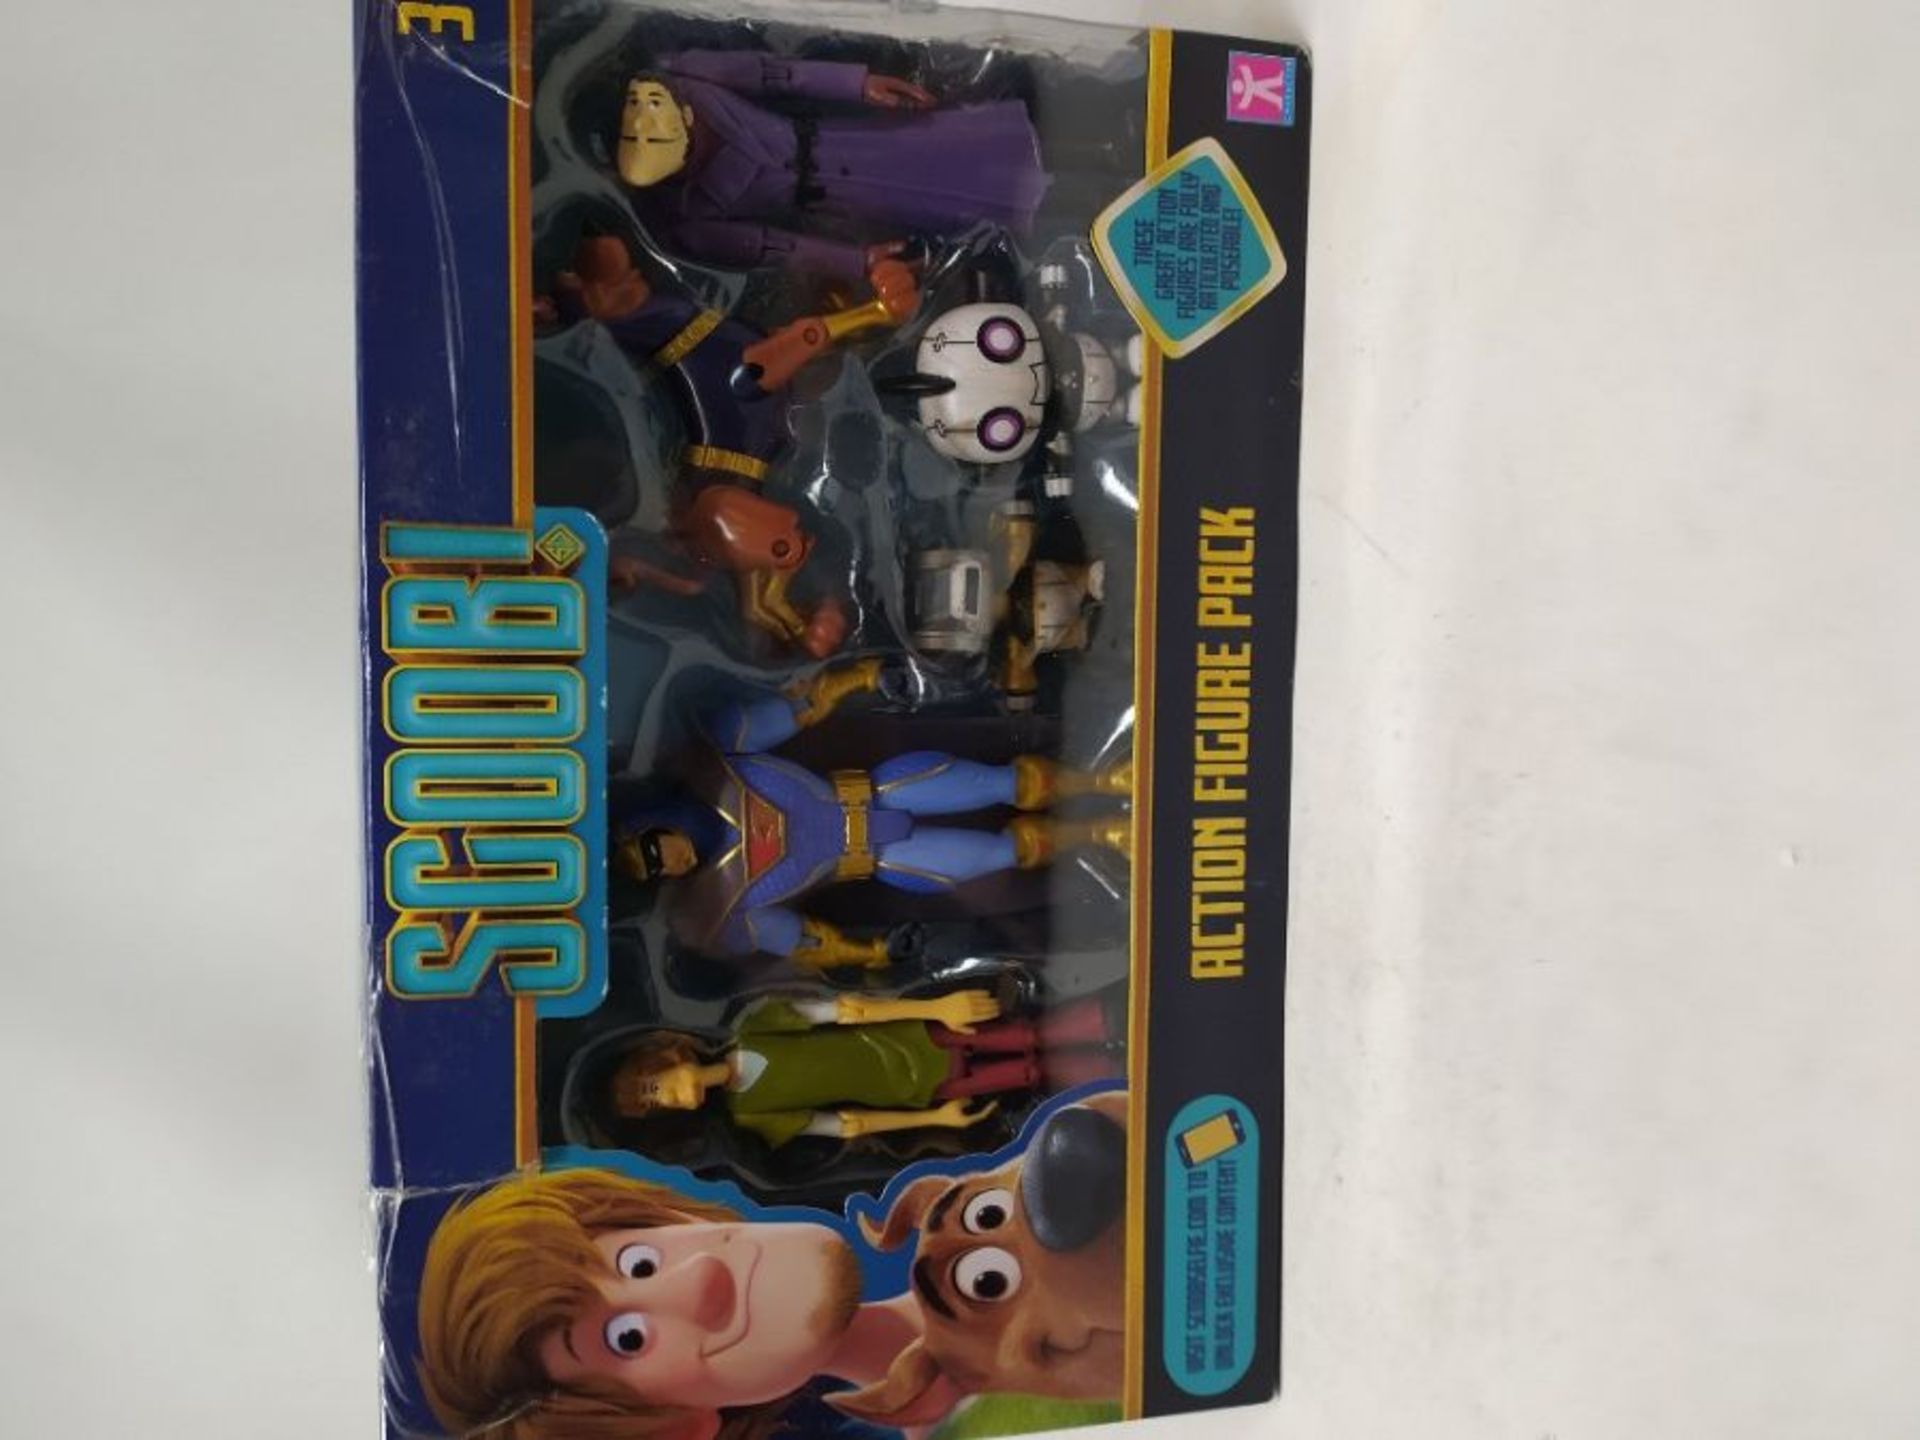 Scooby Doo 7186 SCOOB Action Figure Multi Pack - Image 2 of 2